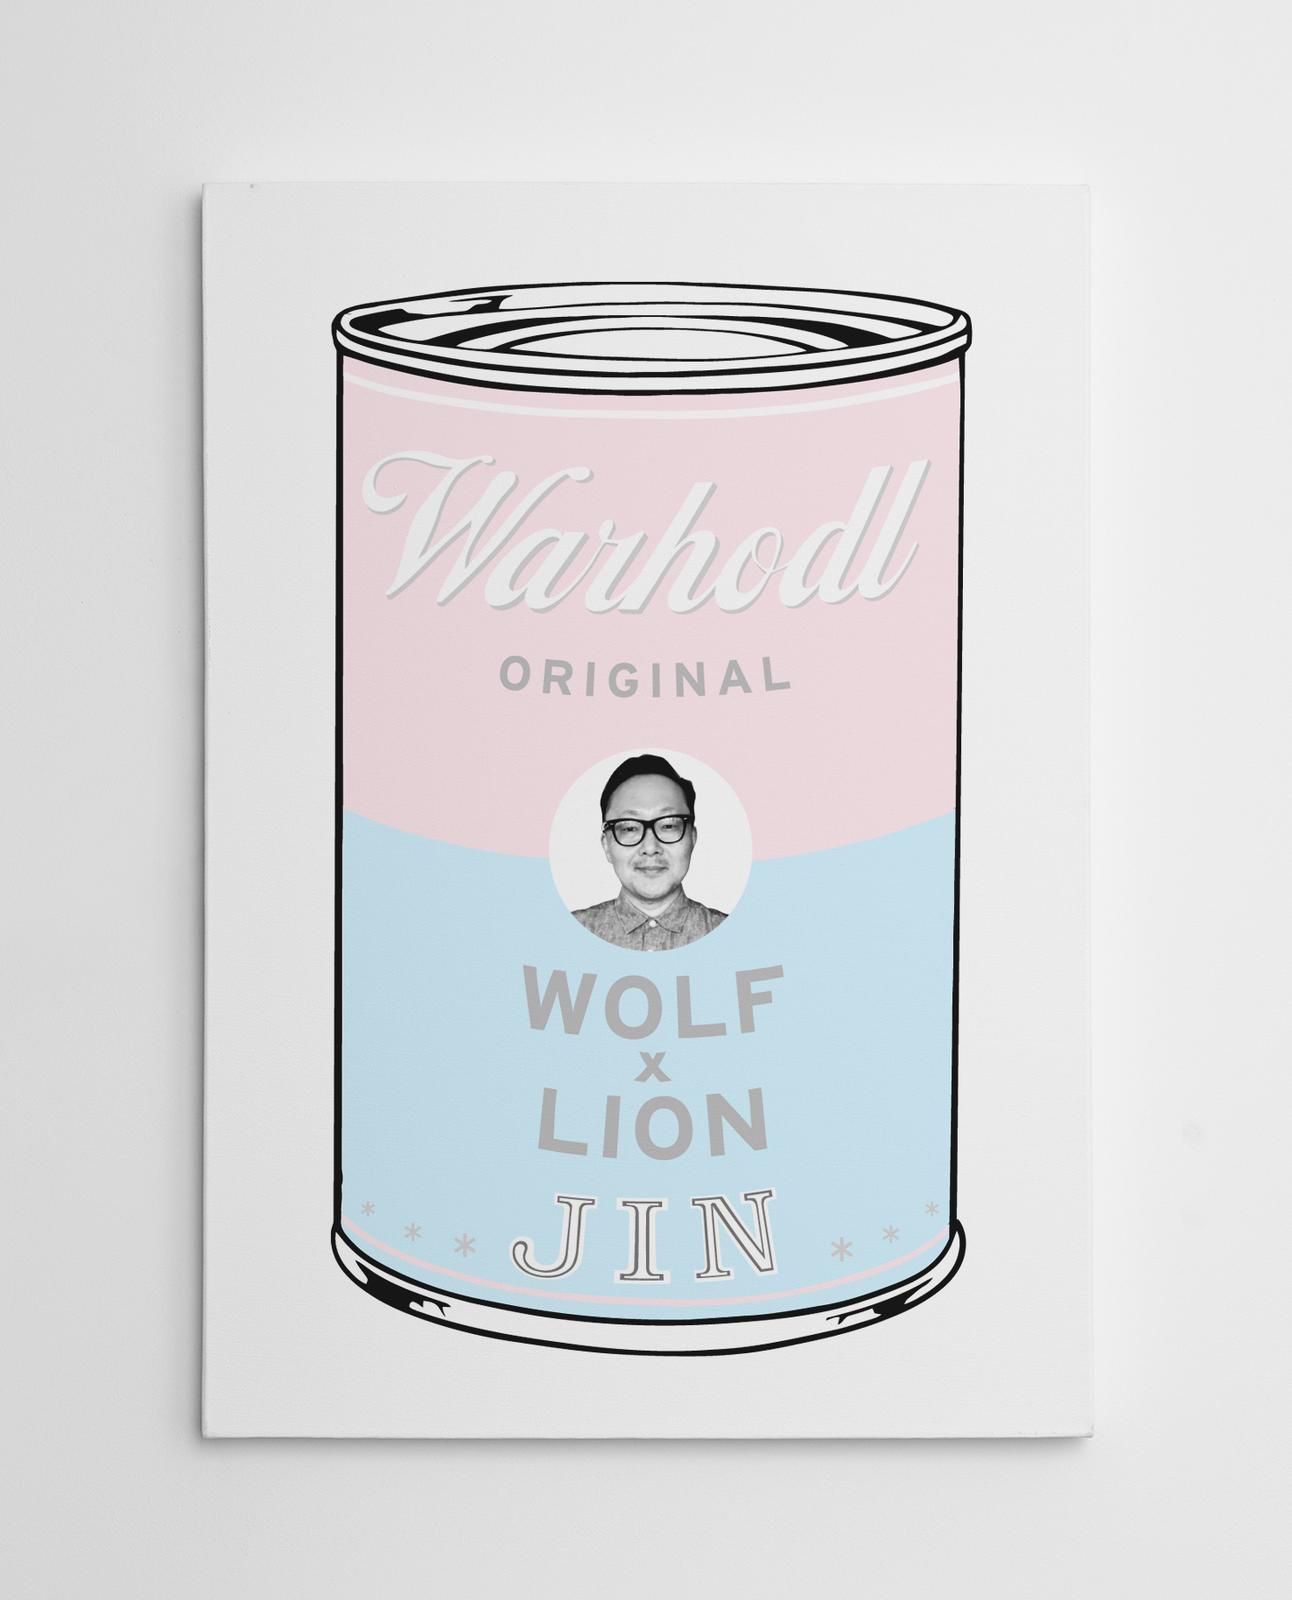 WARHODL Artist Proof Jin "WOLF x LION" Soup Can Edition of 20 